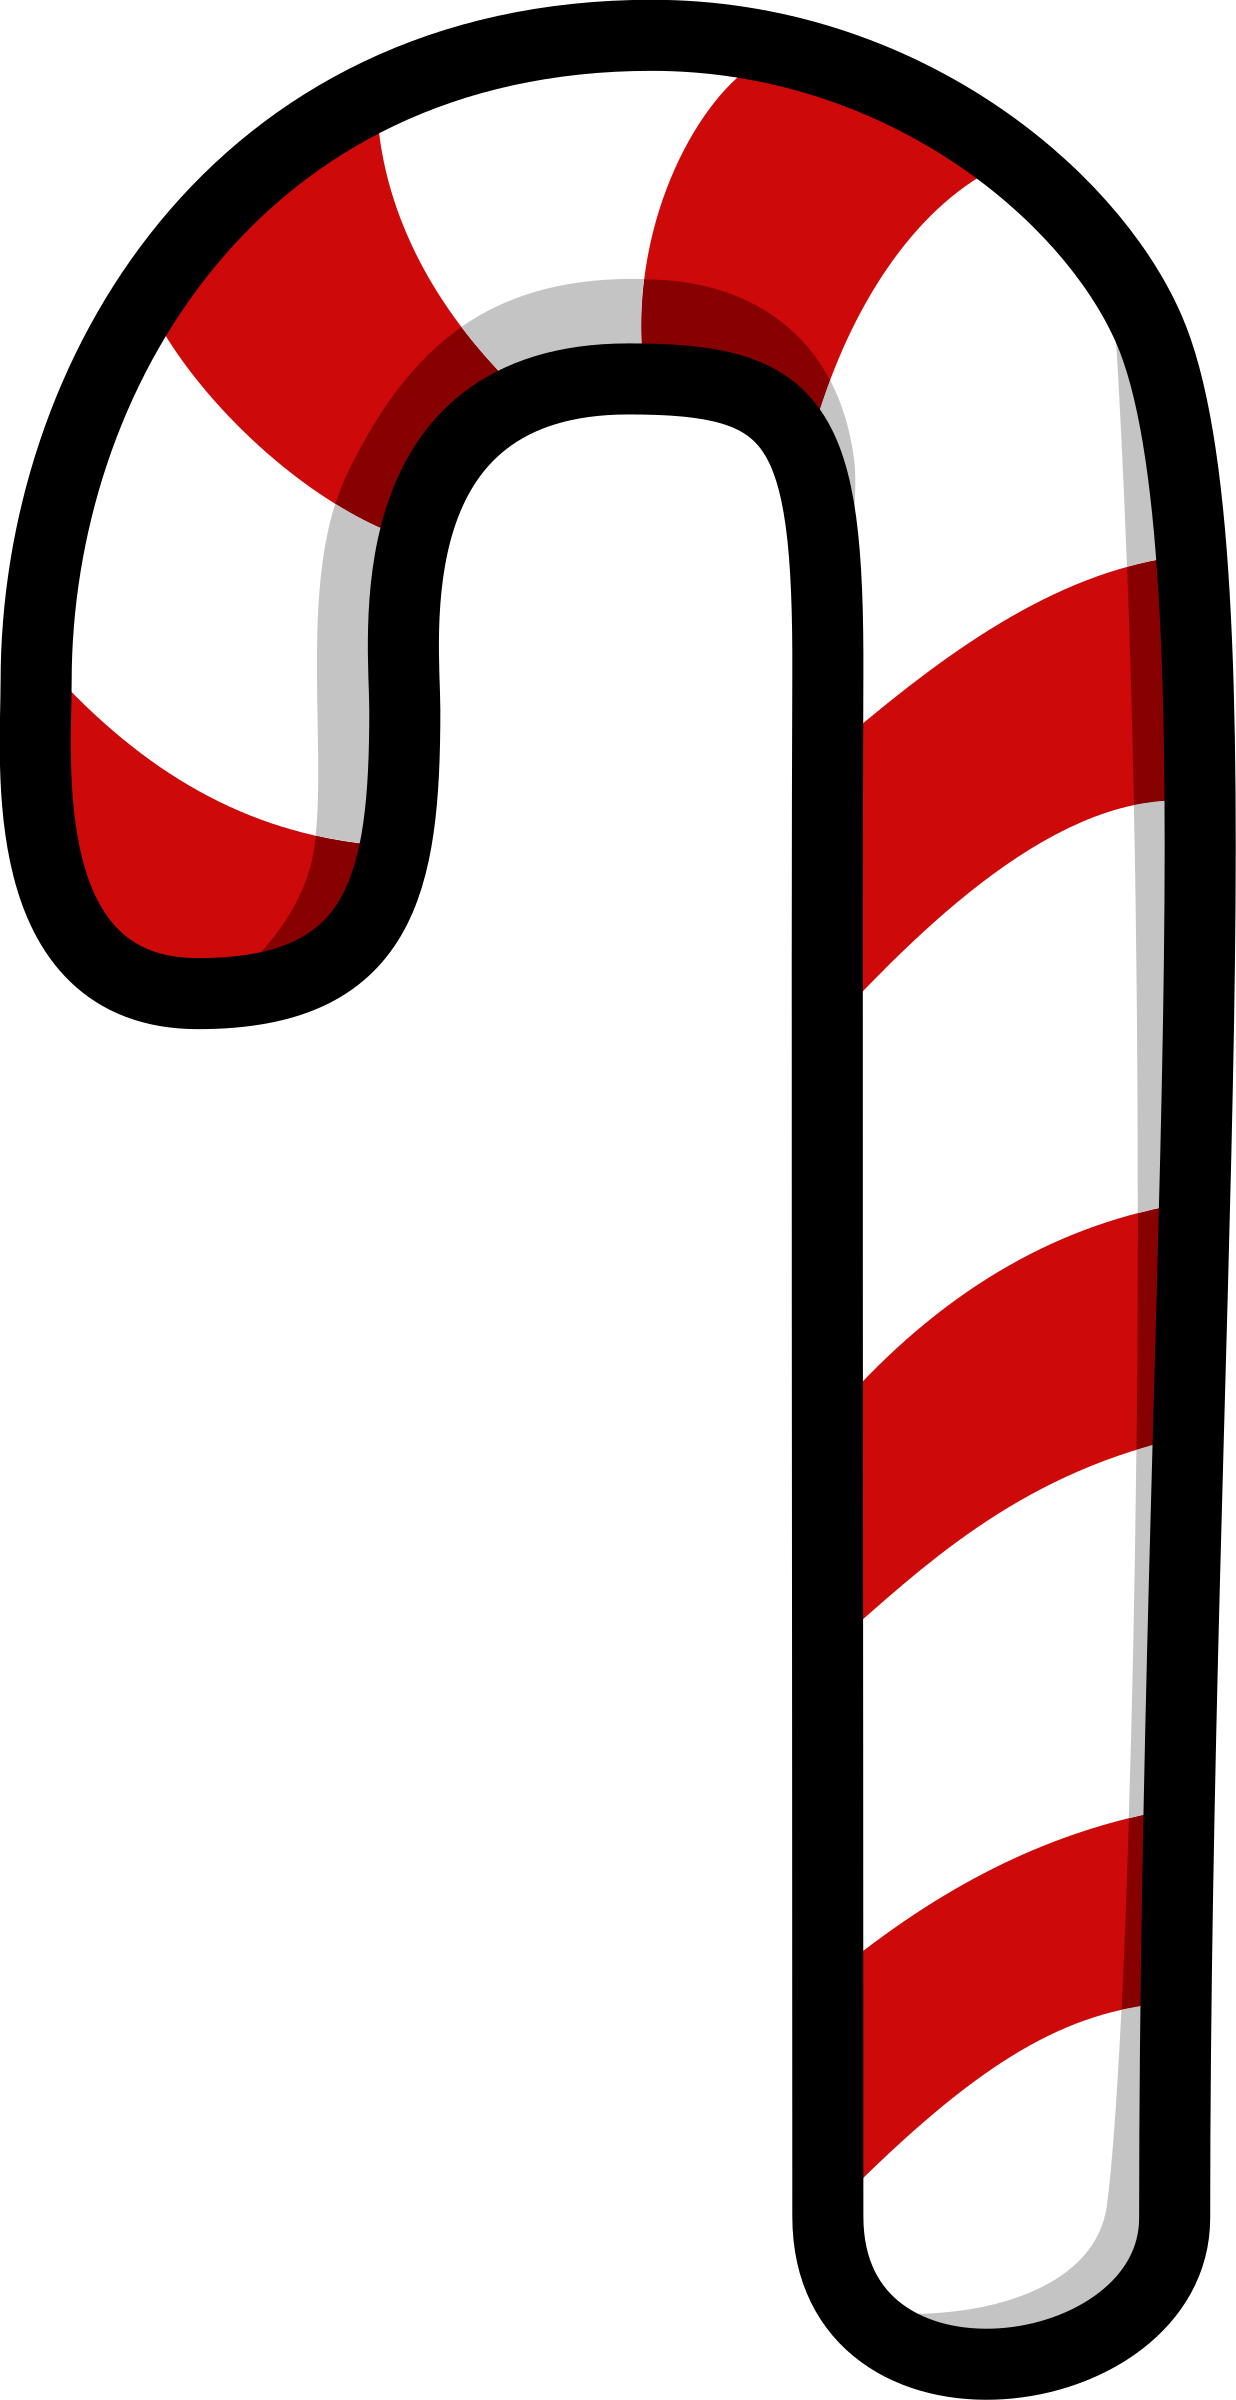 candy cane vector clipart image photo #35968